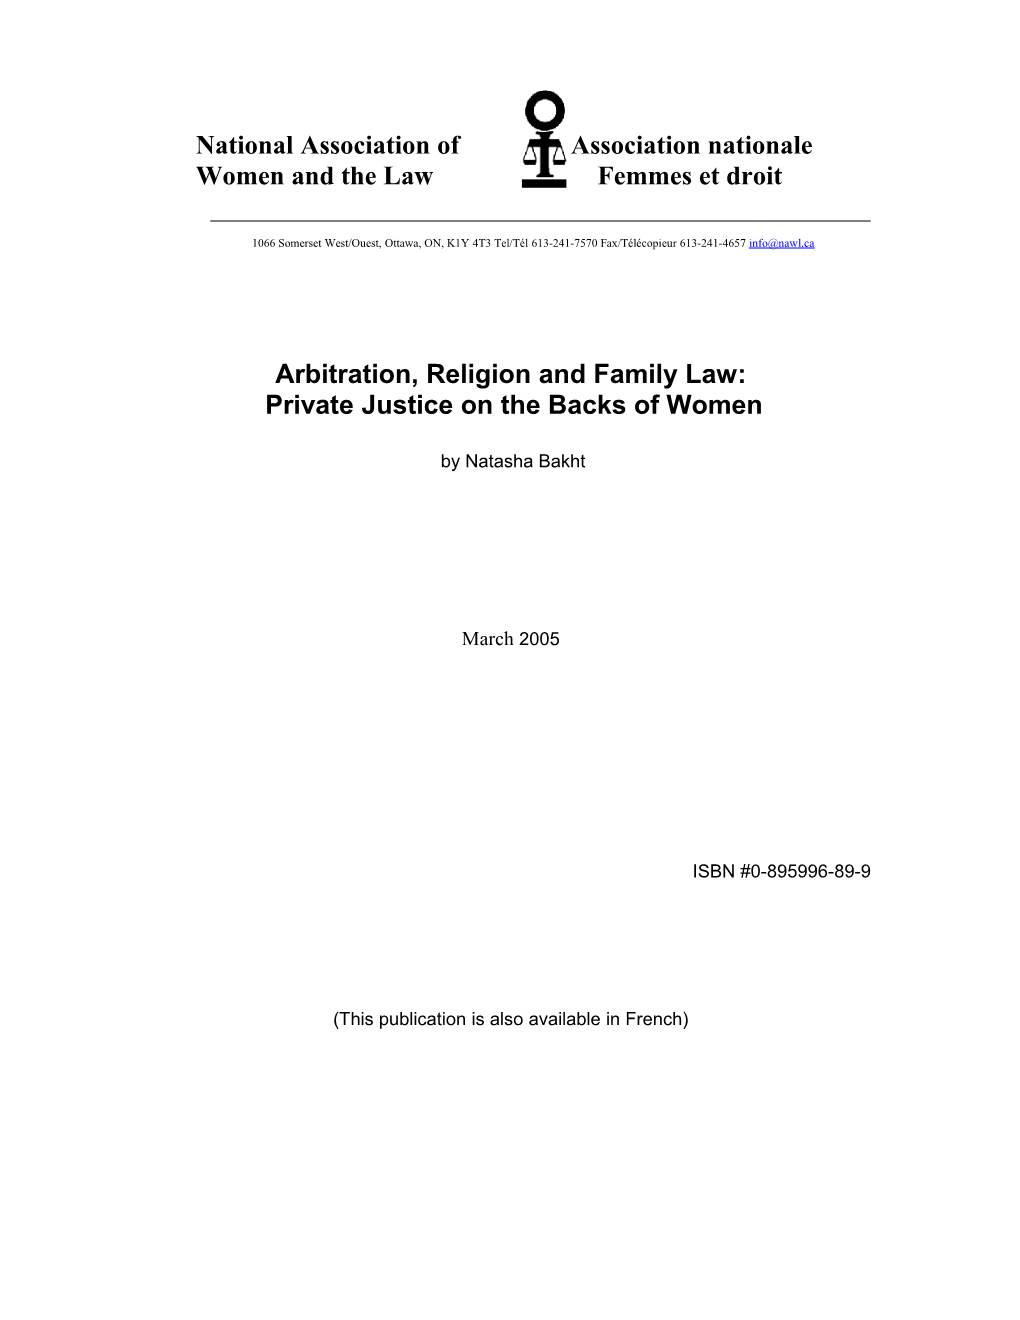 Arbitration, Religion and Family Law